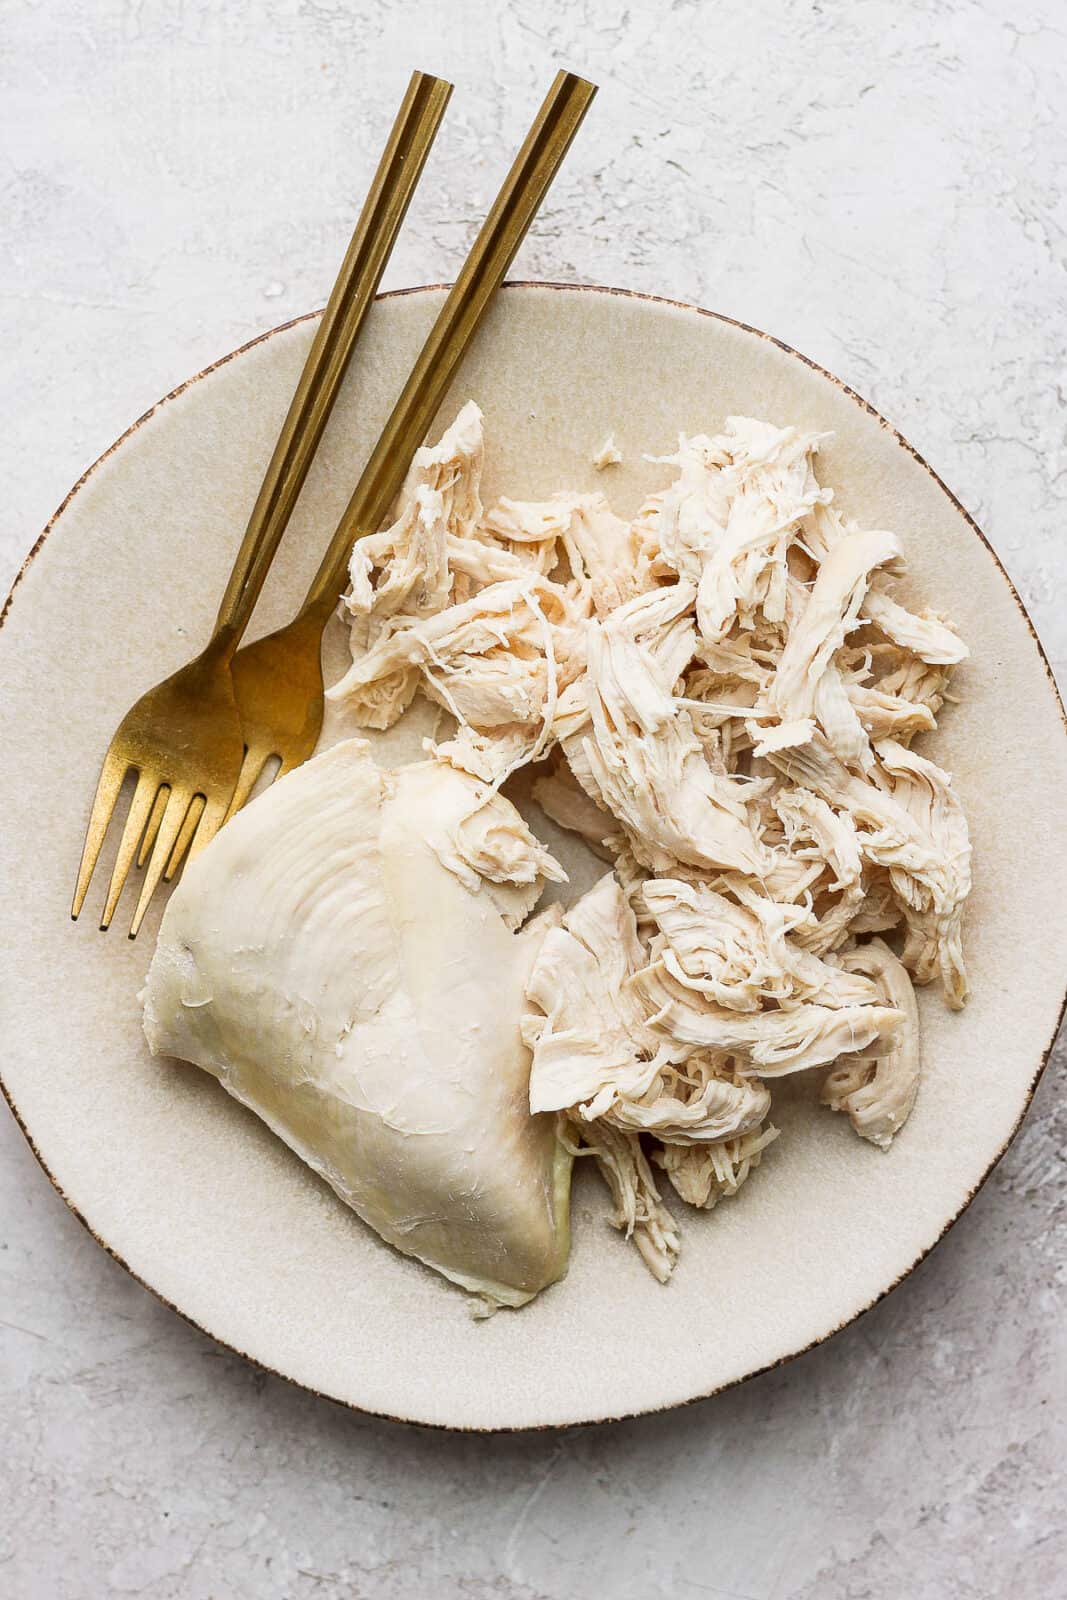 A white plate with two gold forks for shredding, shredded poached chicken, and part of a whole chicken breast.